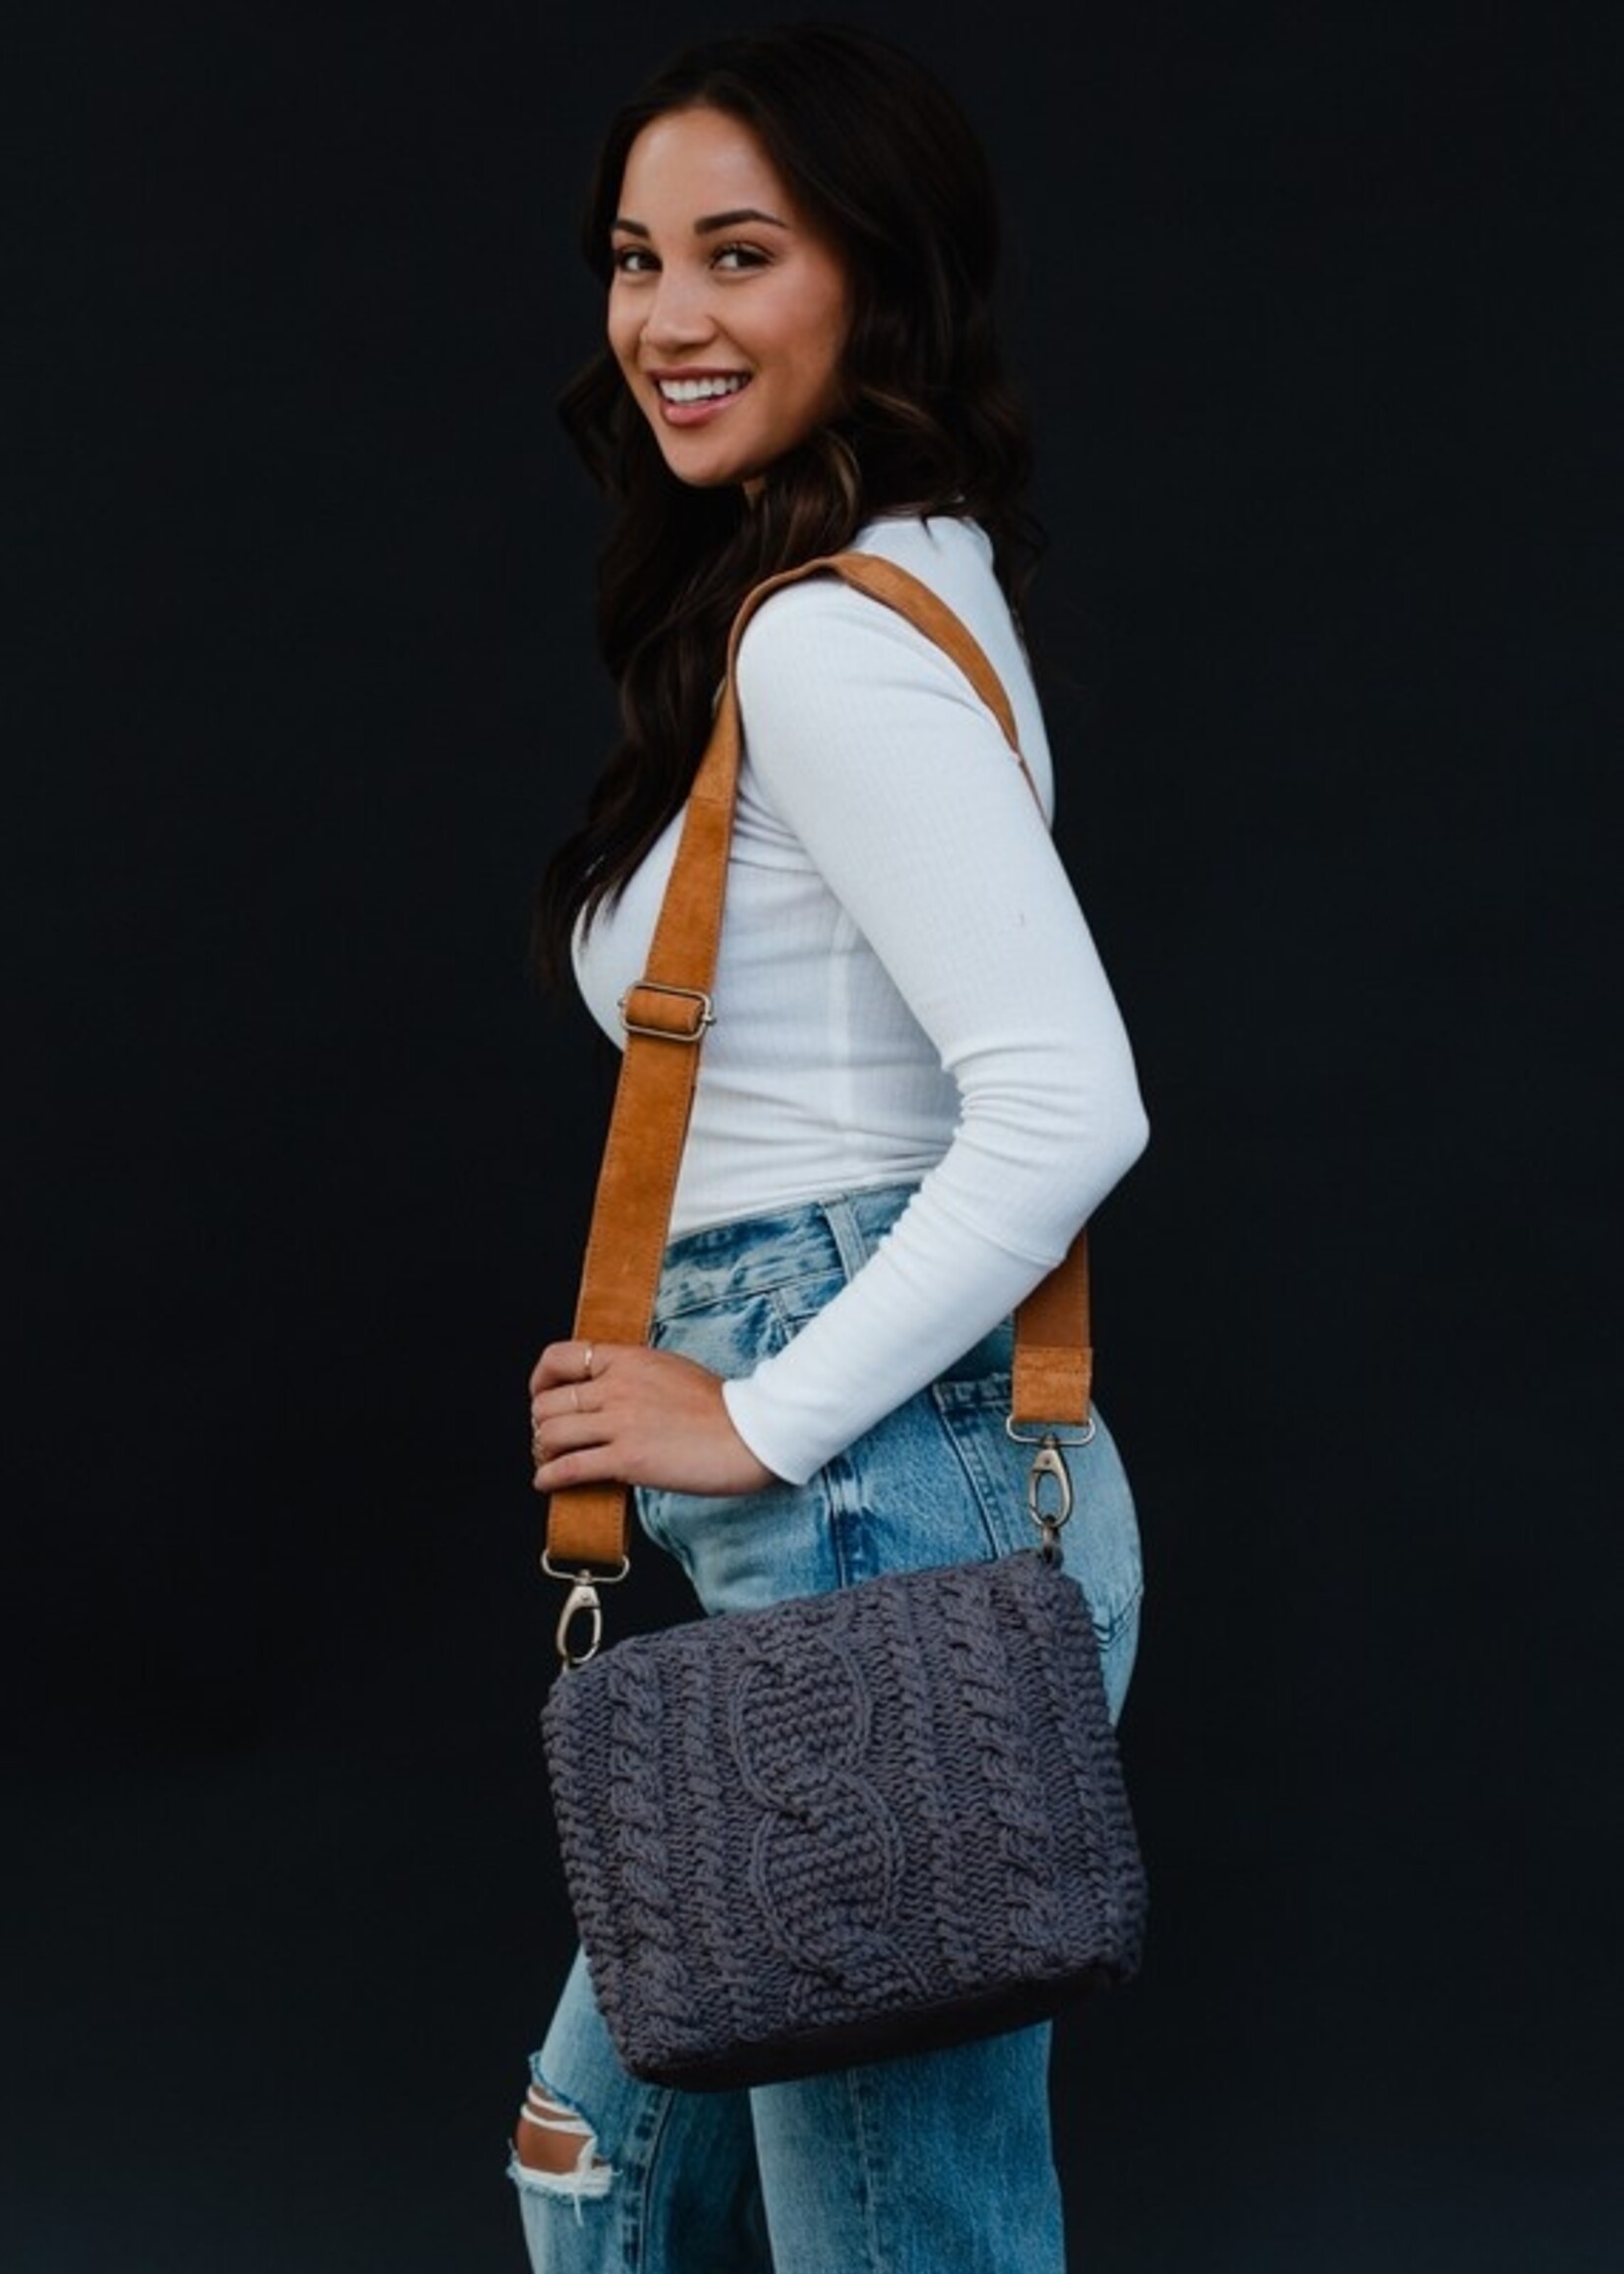 Cable knit crossbody +4 colors